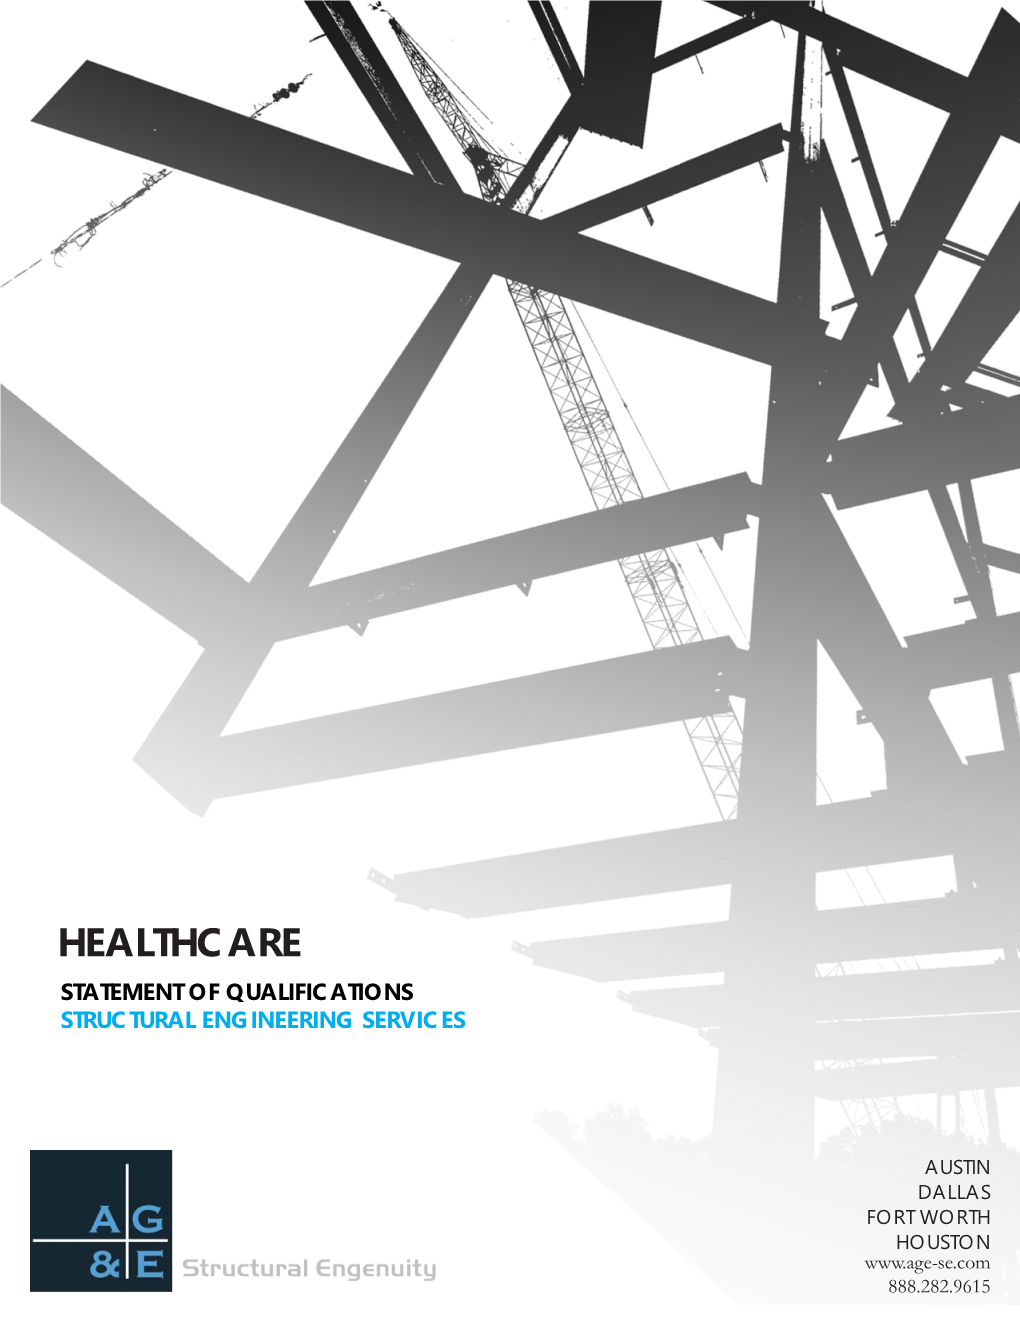 Healthcare Statement of Qualifications Structural Engineering Services